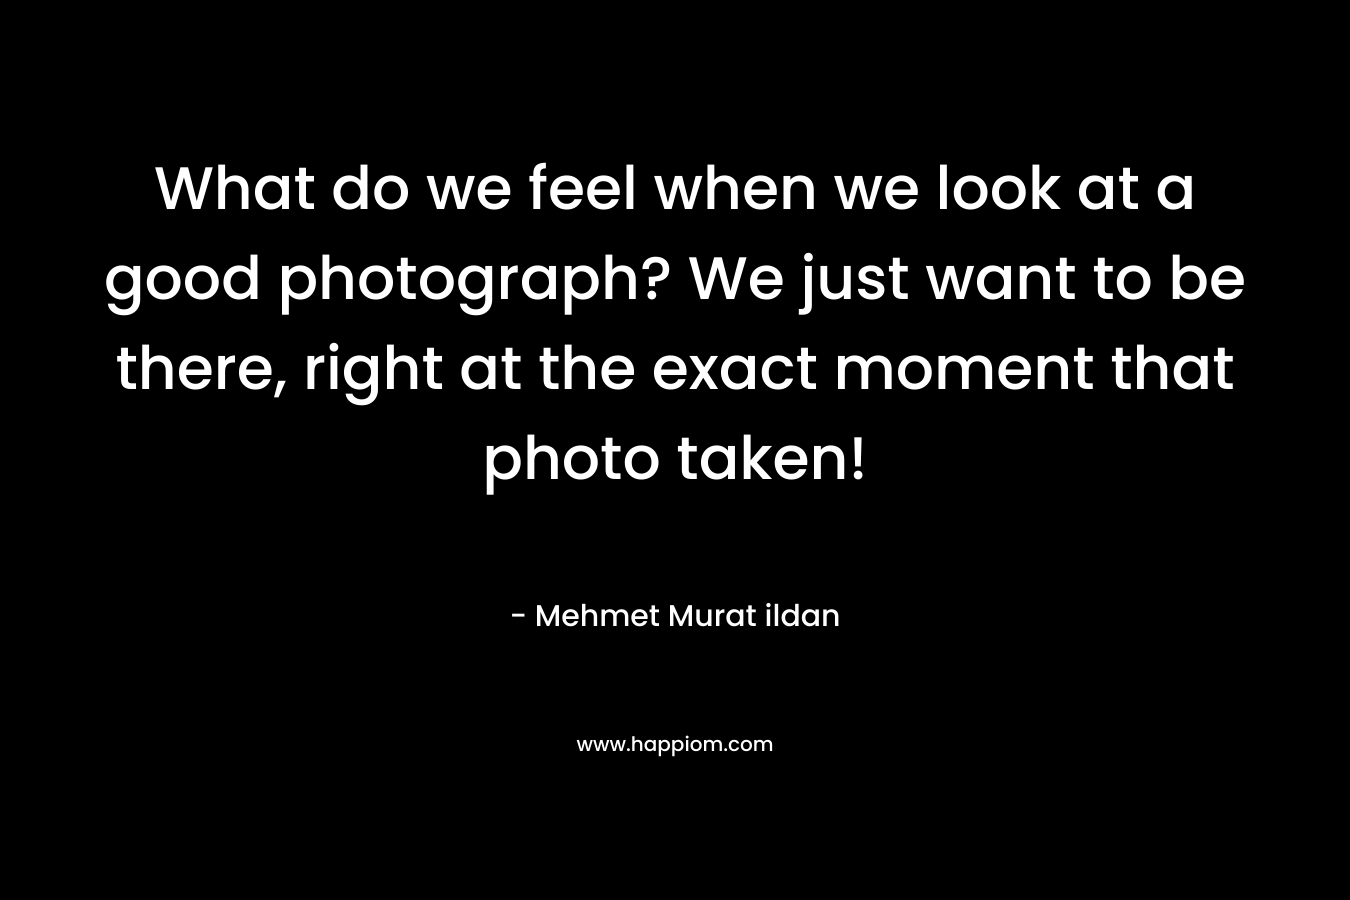 What do we feel when we look at a good photograph? We just want to be there, right at the exact moment that photo taken! – Mehmet Murat ildan